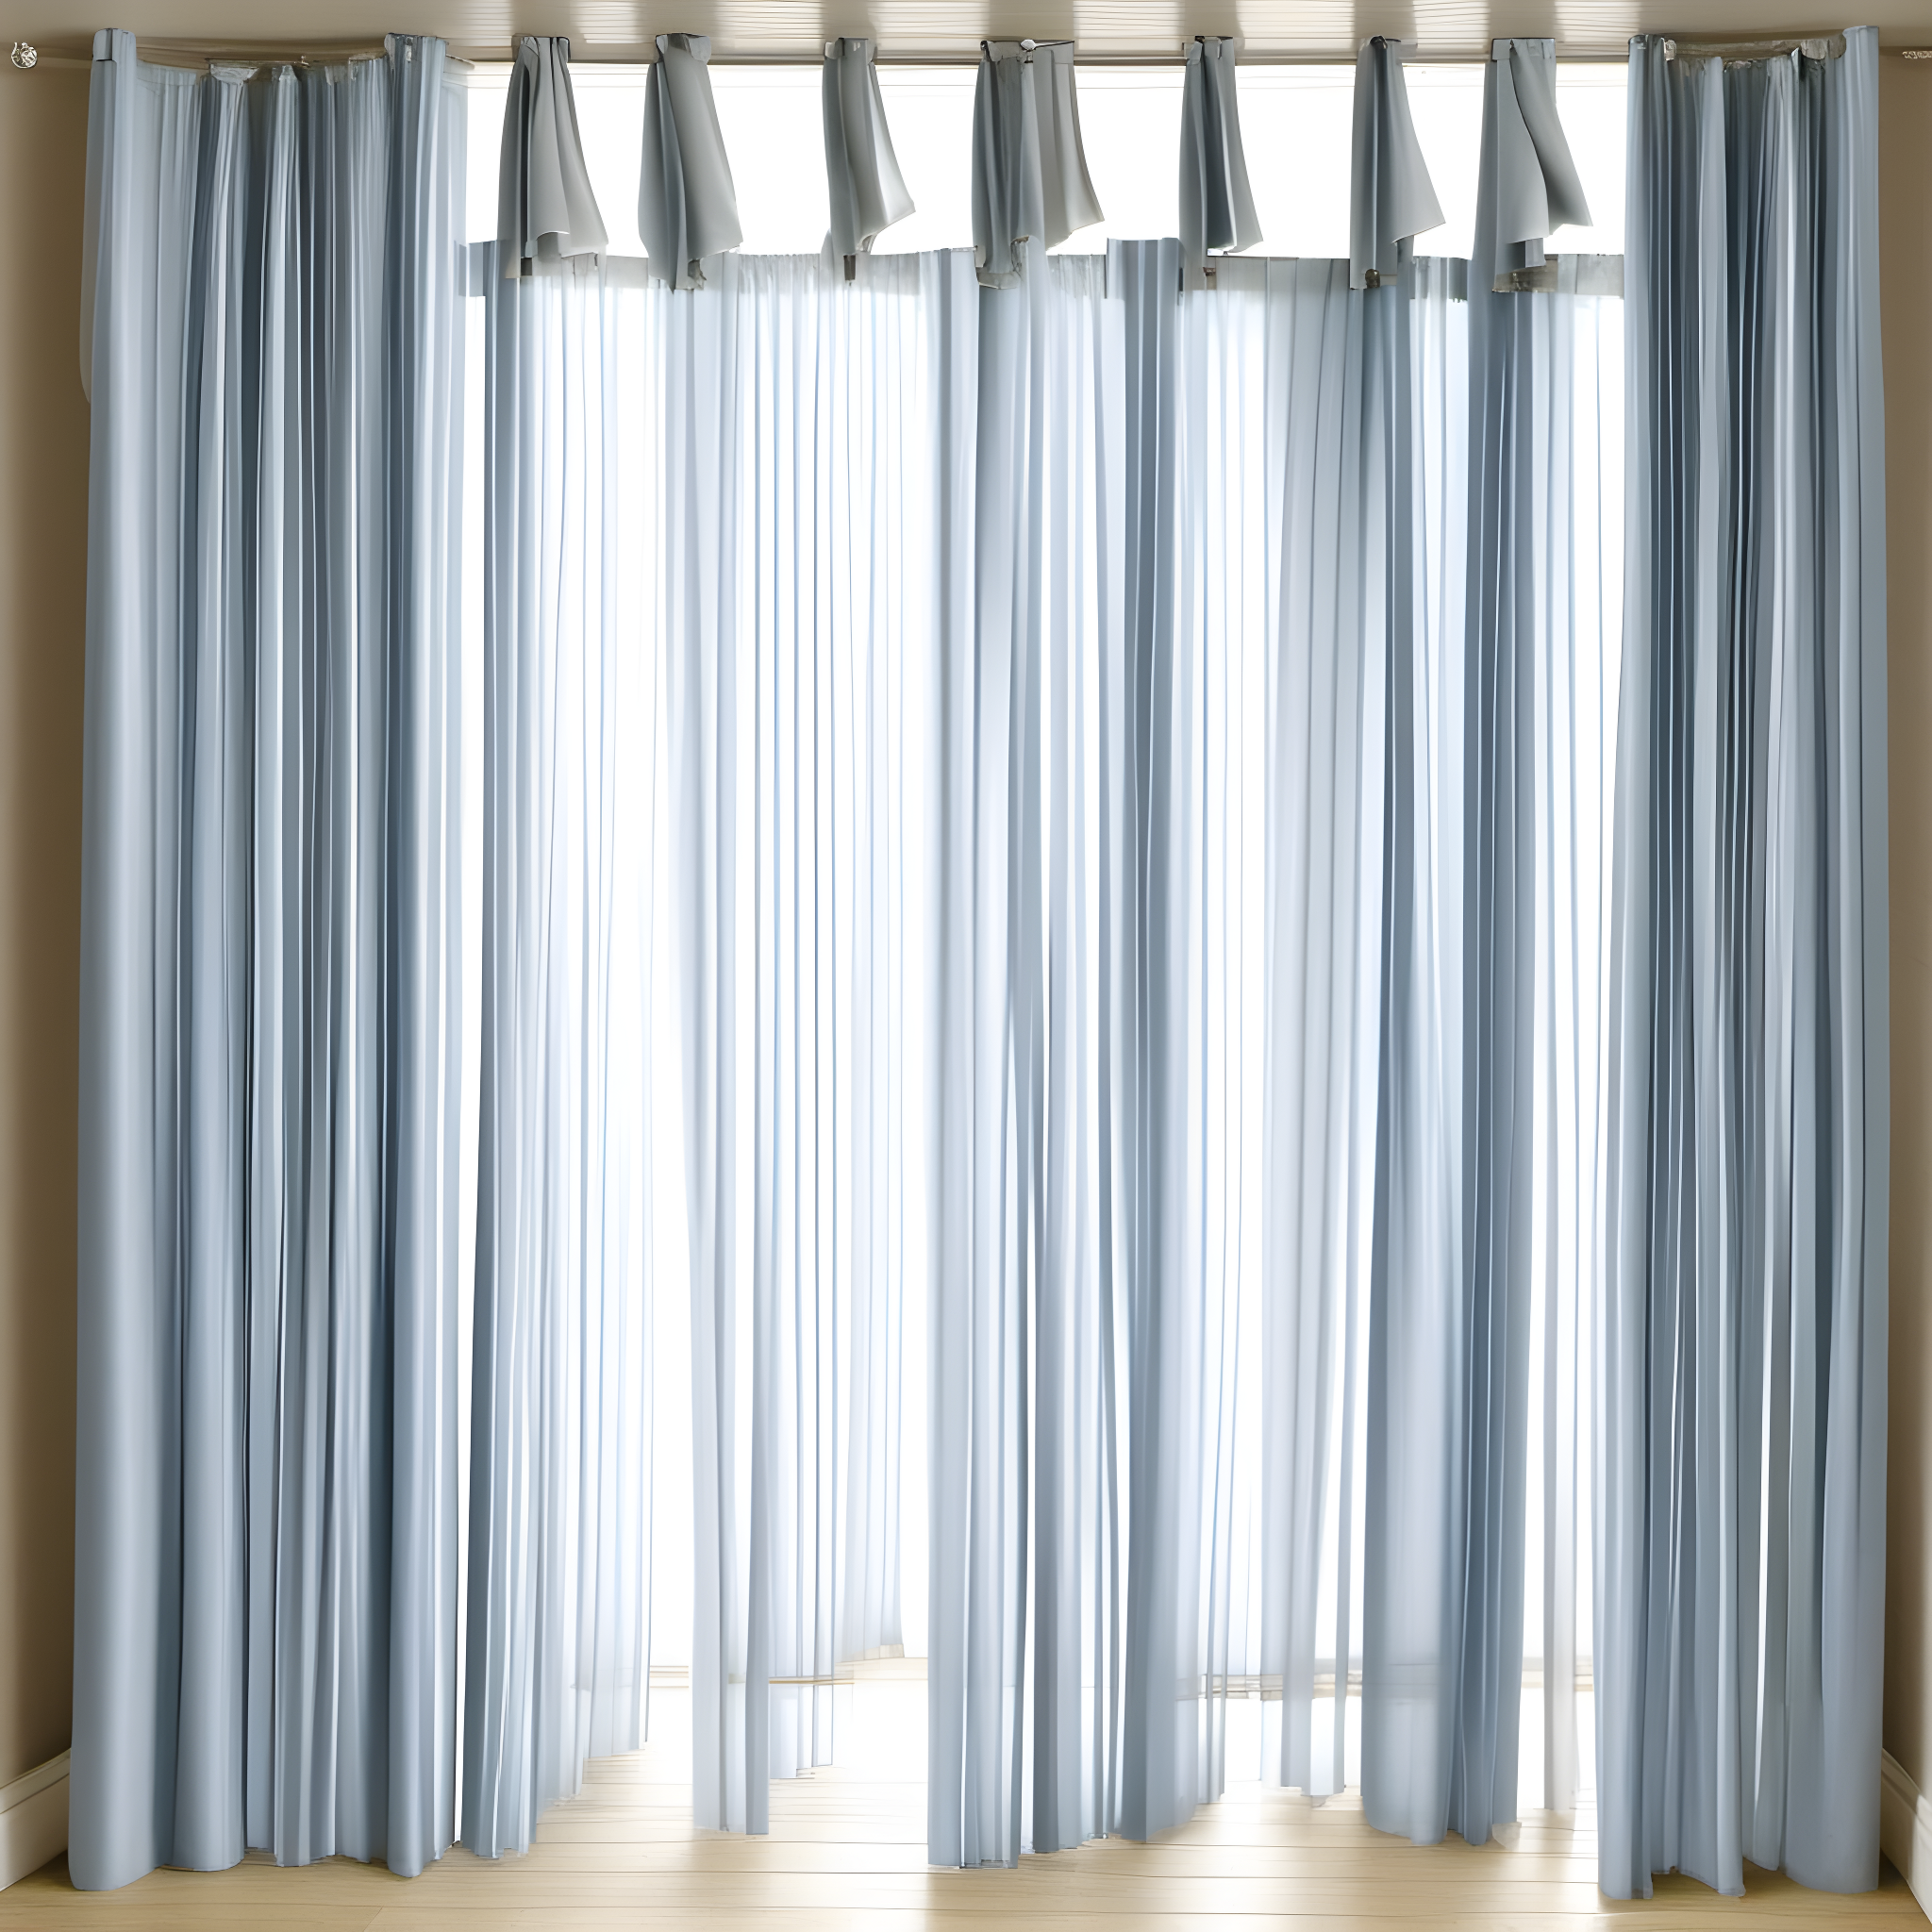 Luxury curtains for living room